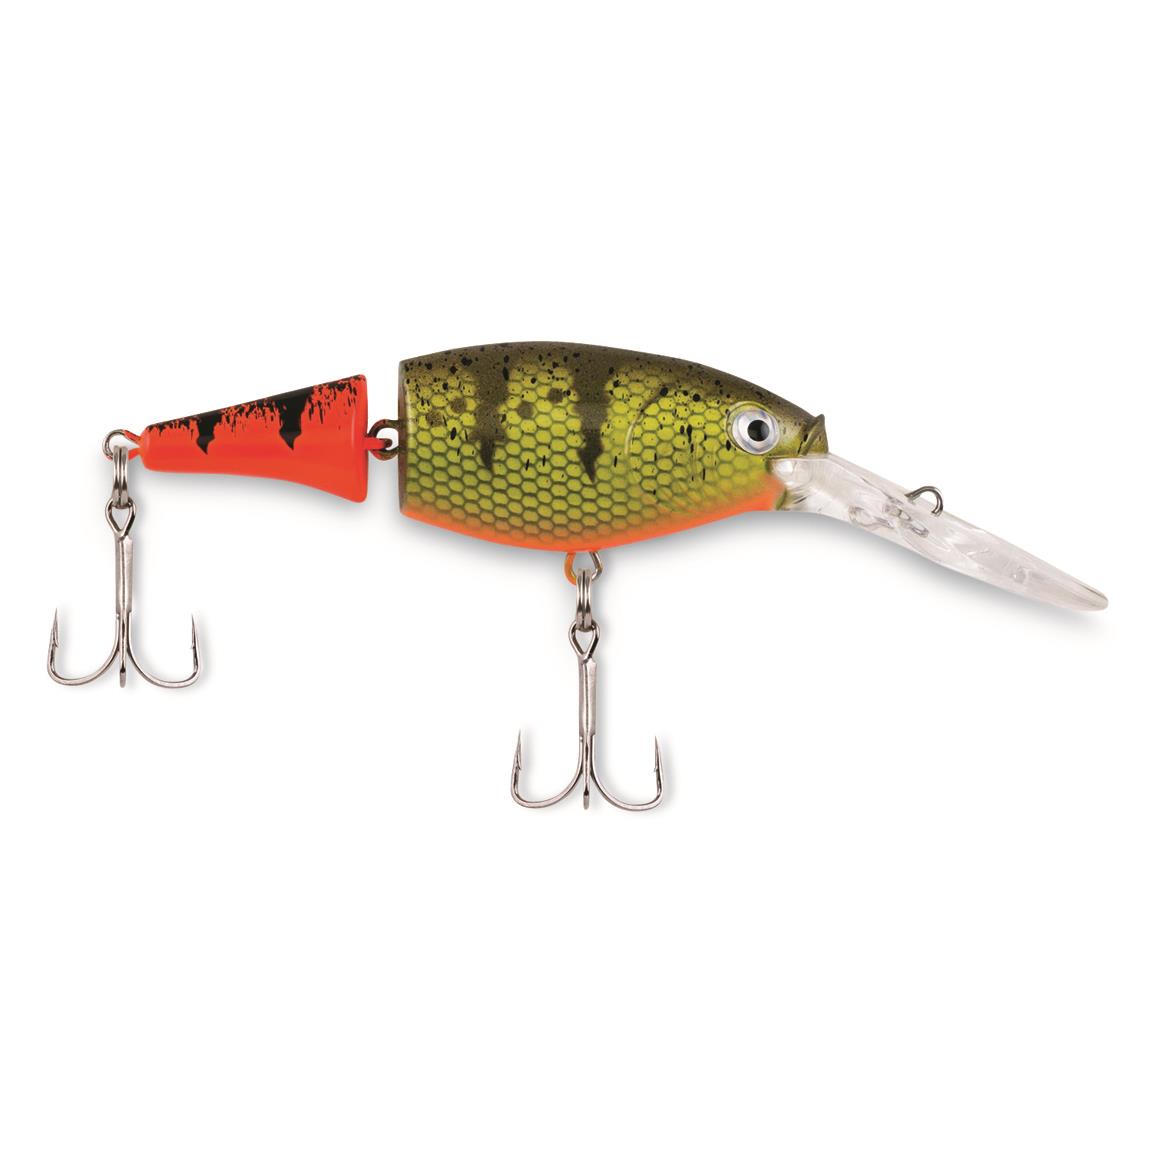 Berkley Flicker Shad Jointed Lure, Size 7, Firetail Hot Perch